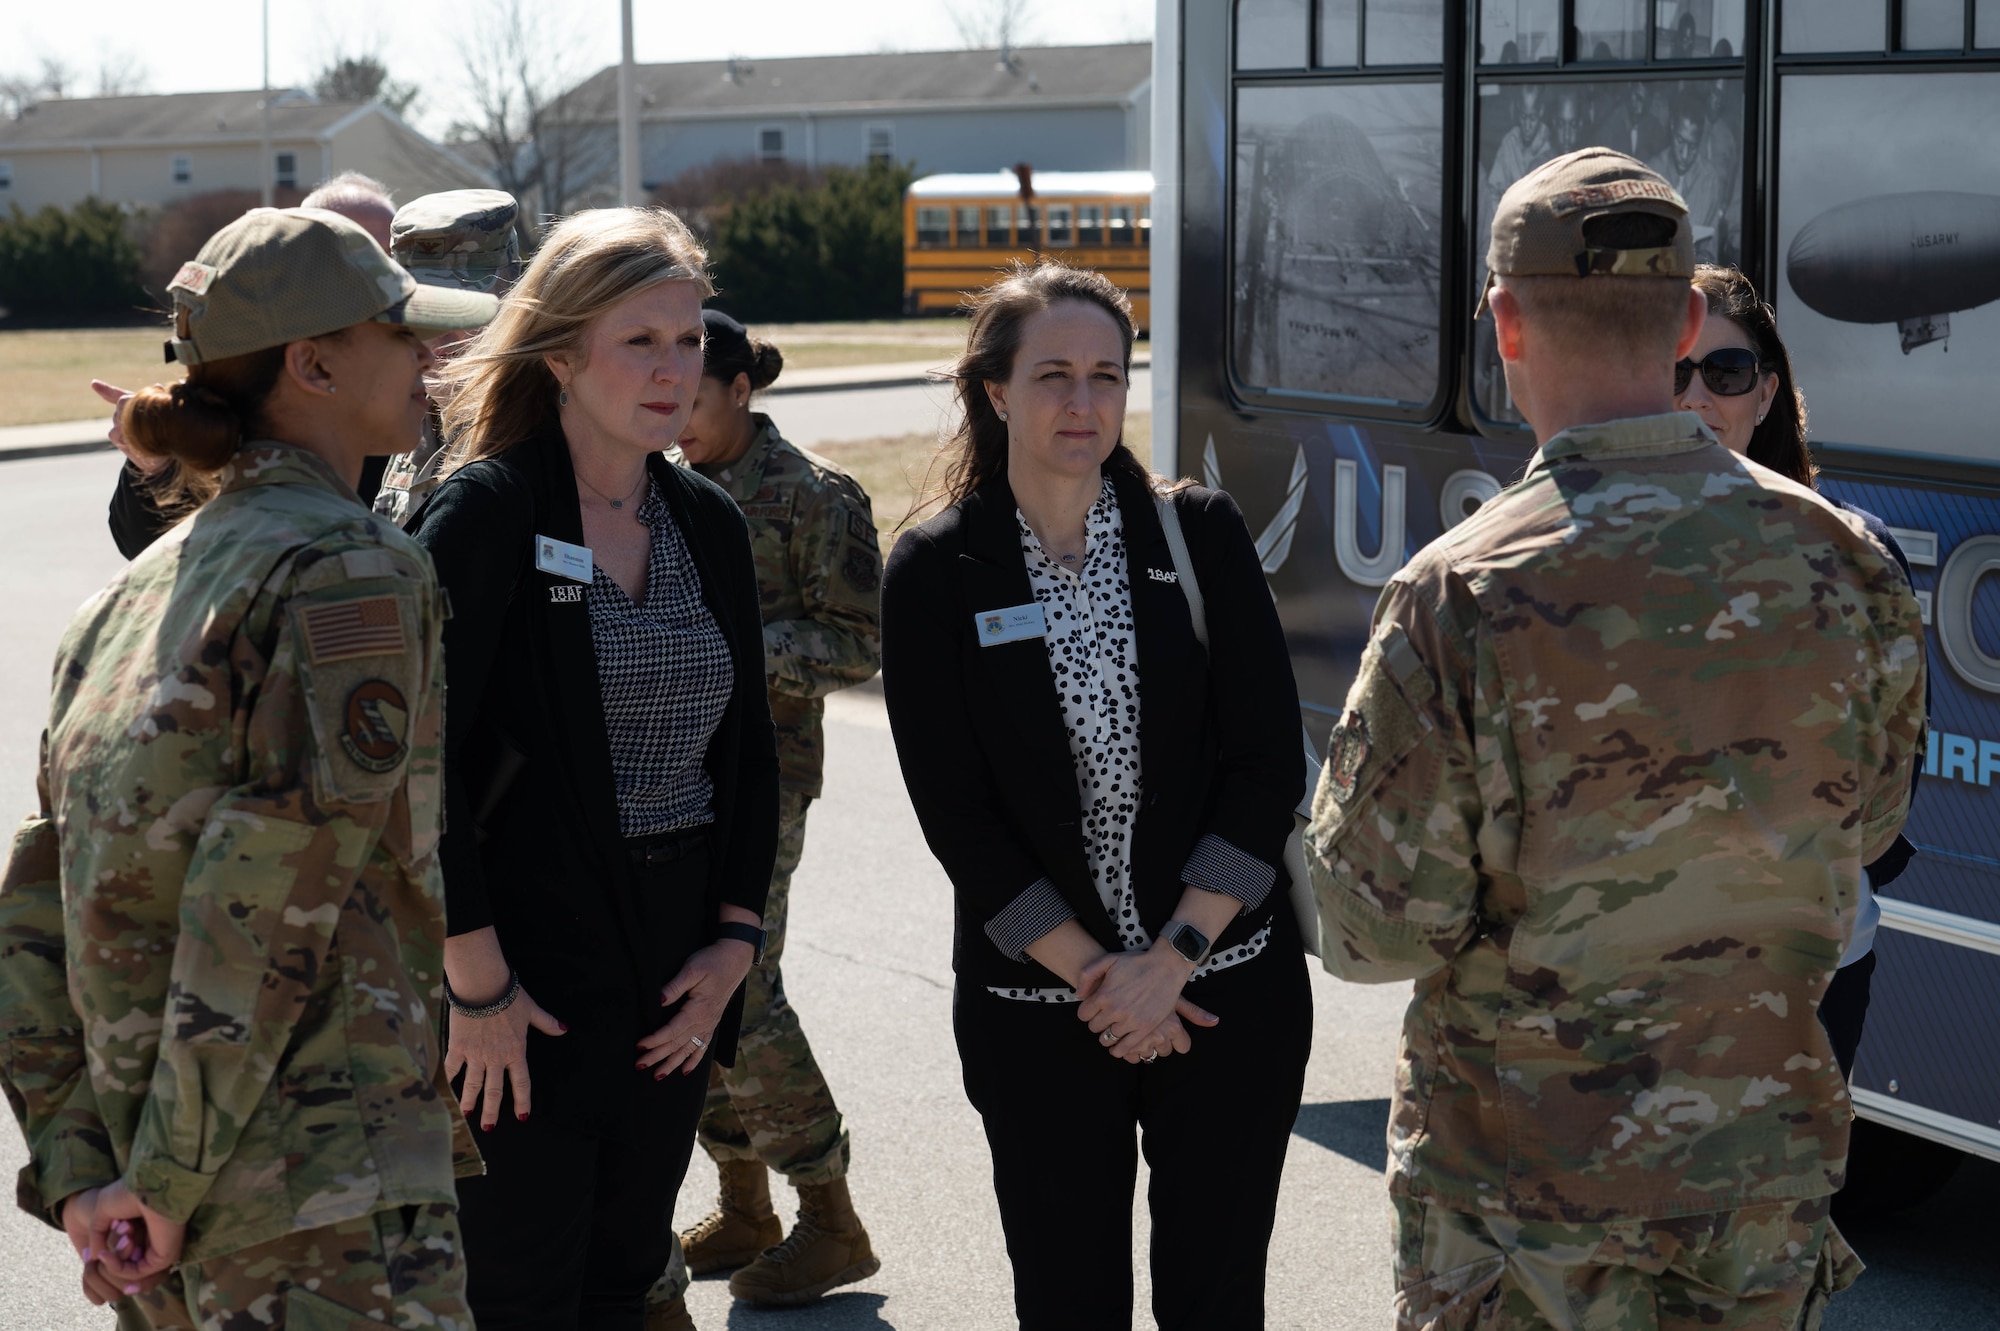 Servicemembers from team Scott greet Mrs. Shannon Bibb and Mrs. Nicki Bickley, 18th Air Force senior leadership spouses, outside the Youth Center on Scott Air Force Base, Illinois, March 9, 2022.  Servicemembers hosted a forum to discuss the impacts and talent management of dual Department of Defense career families with Mrs. Bibb and Mrs. Bickley. (U.S. Air Force photo by Airman 1st Class Mark Sulaica)